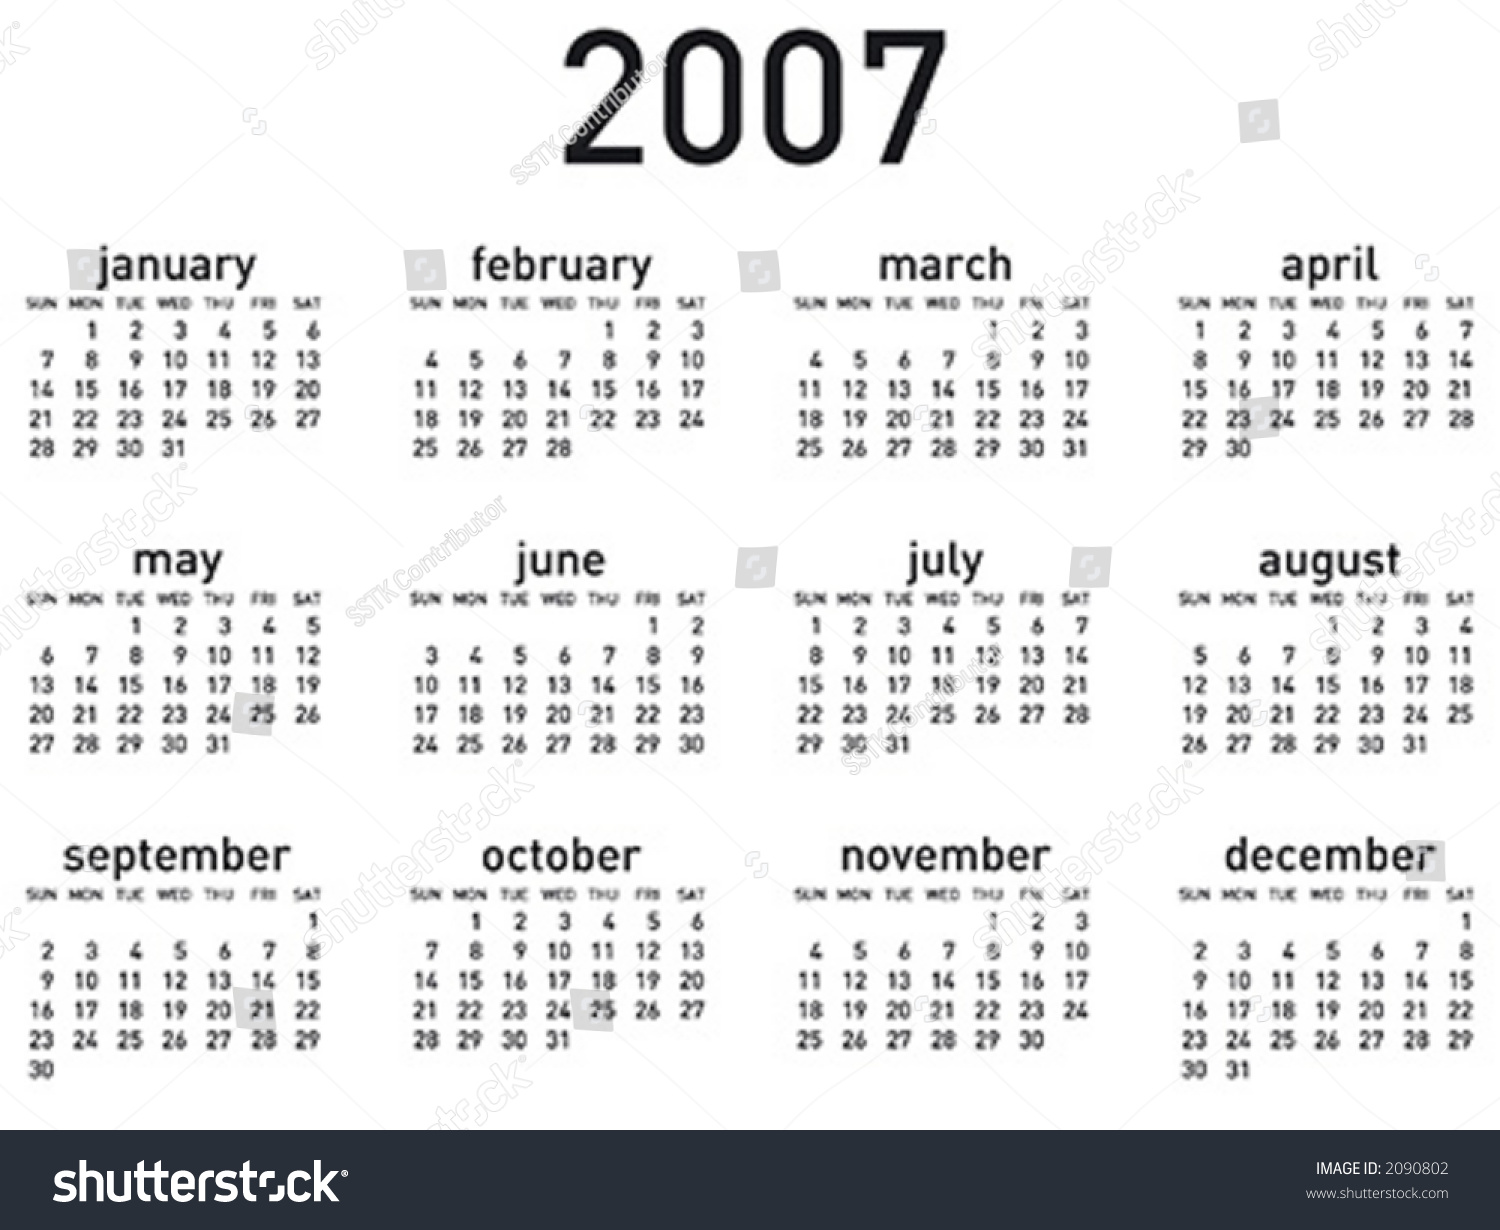 Simple 2007 Calendar Horizontal Layout Vector Format Can Be Scaled